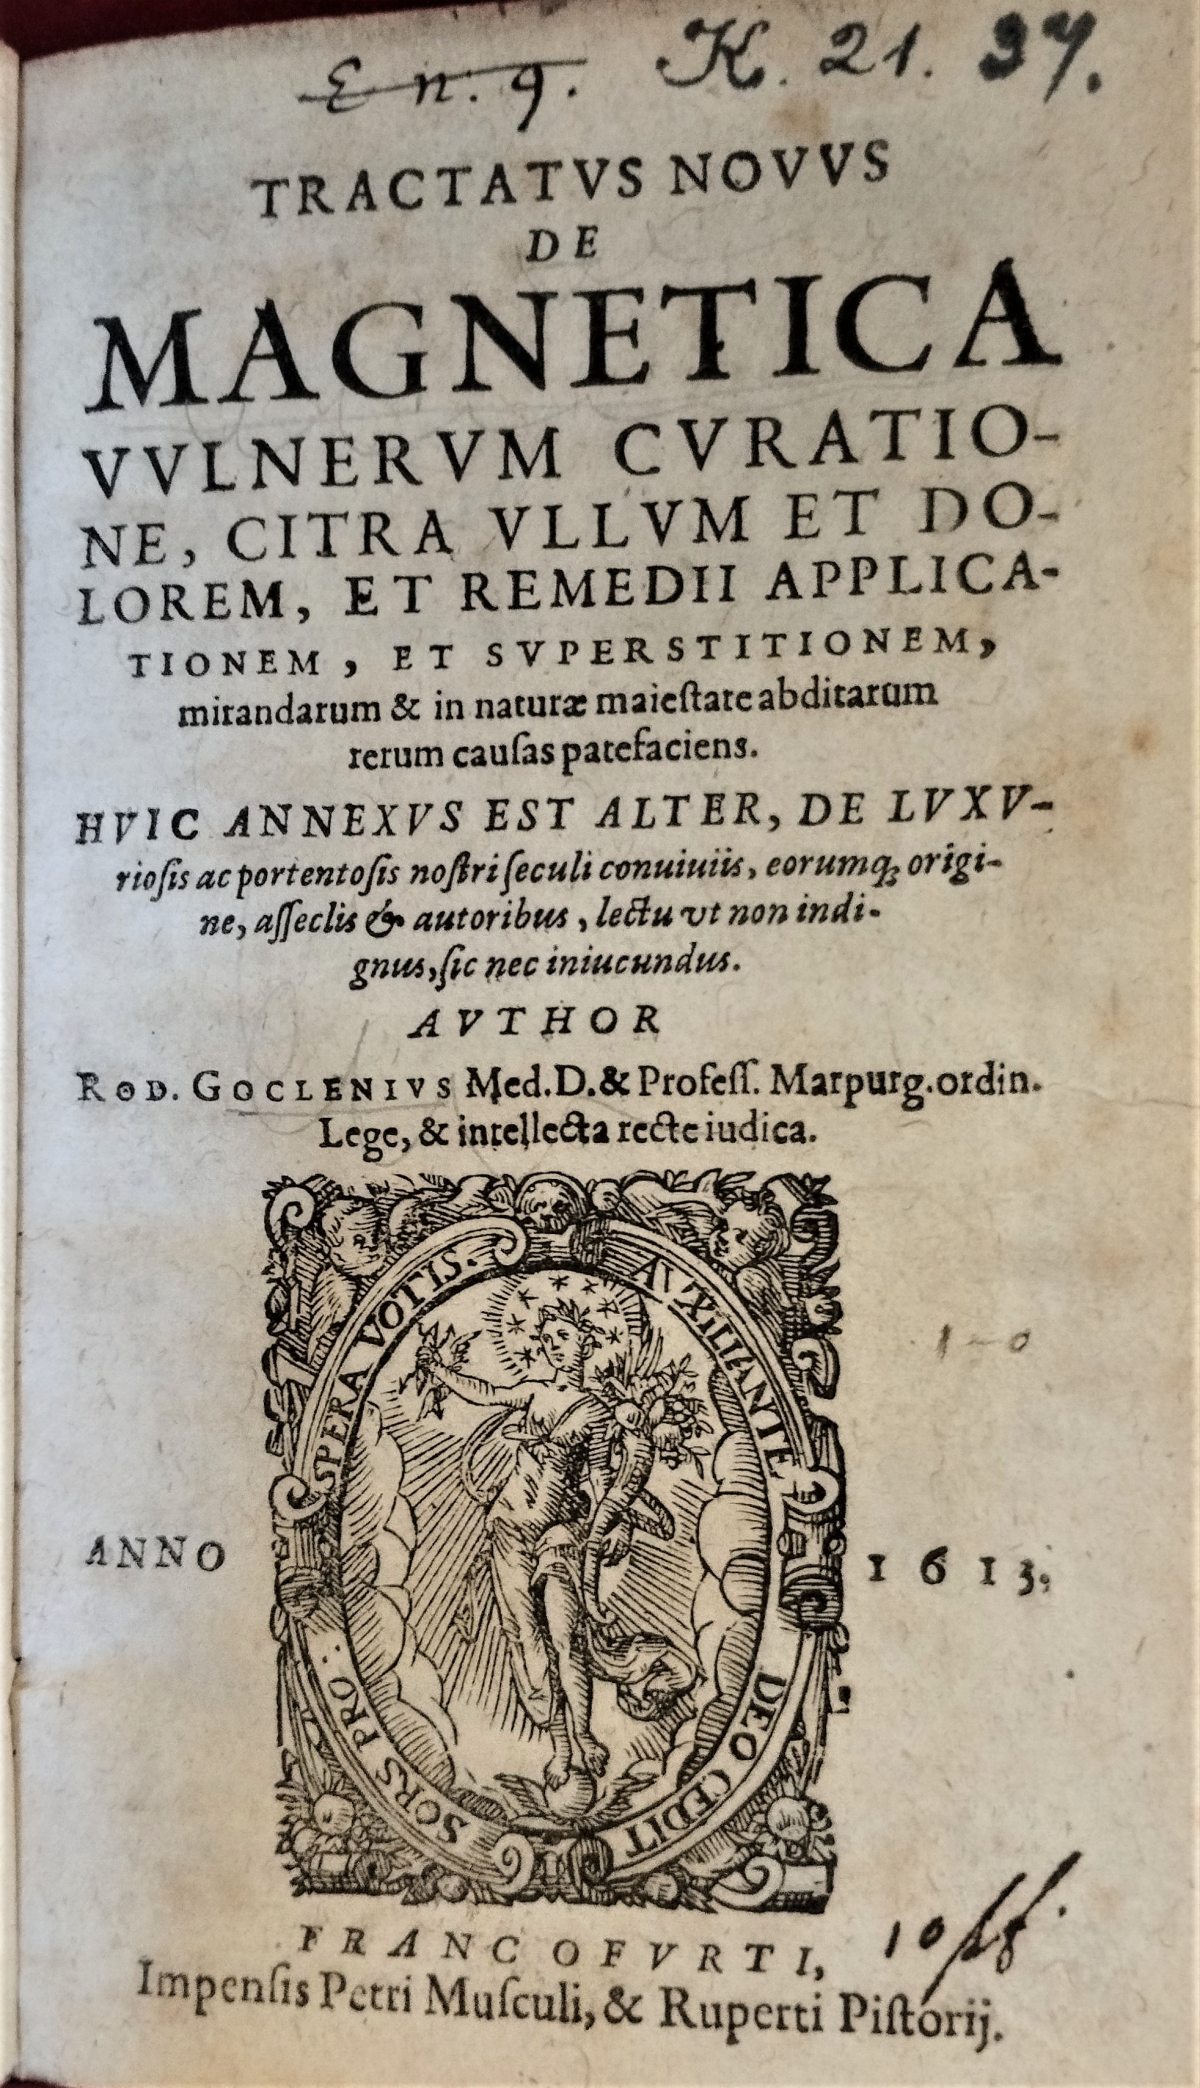 The title page in a 17th-century printed book, with a long Latin text in varied typography and a woodcut illustration serving as the printer's device.